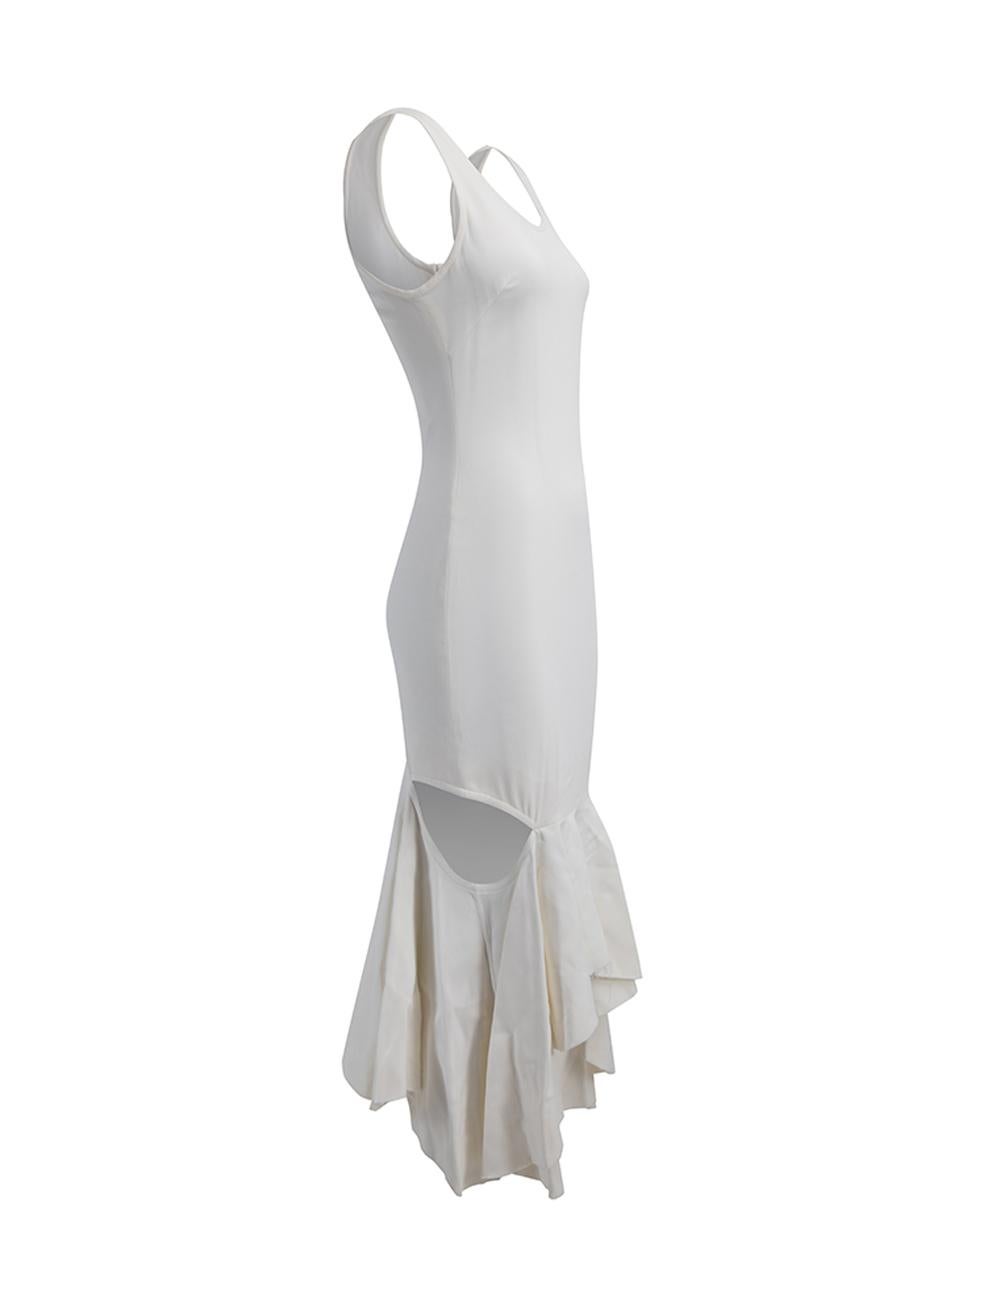 CONDITION is Very good. Minimnal wear to dress is evident. Fraying to hemline and a small oil stain near the hem on this used Givenchy designer resale item. Details White Synthetic Knee Length dress Round neckline Drop waist Cut out design on skirt